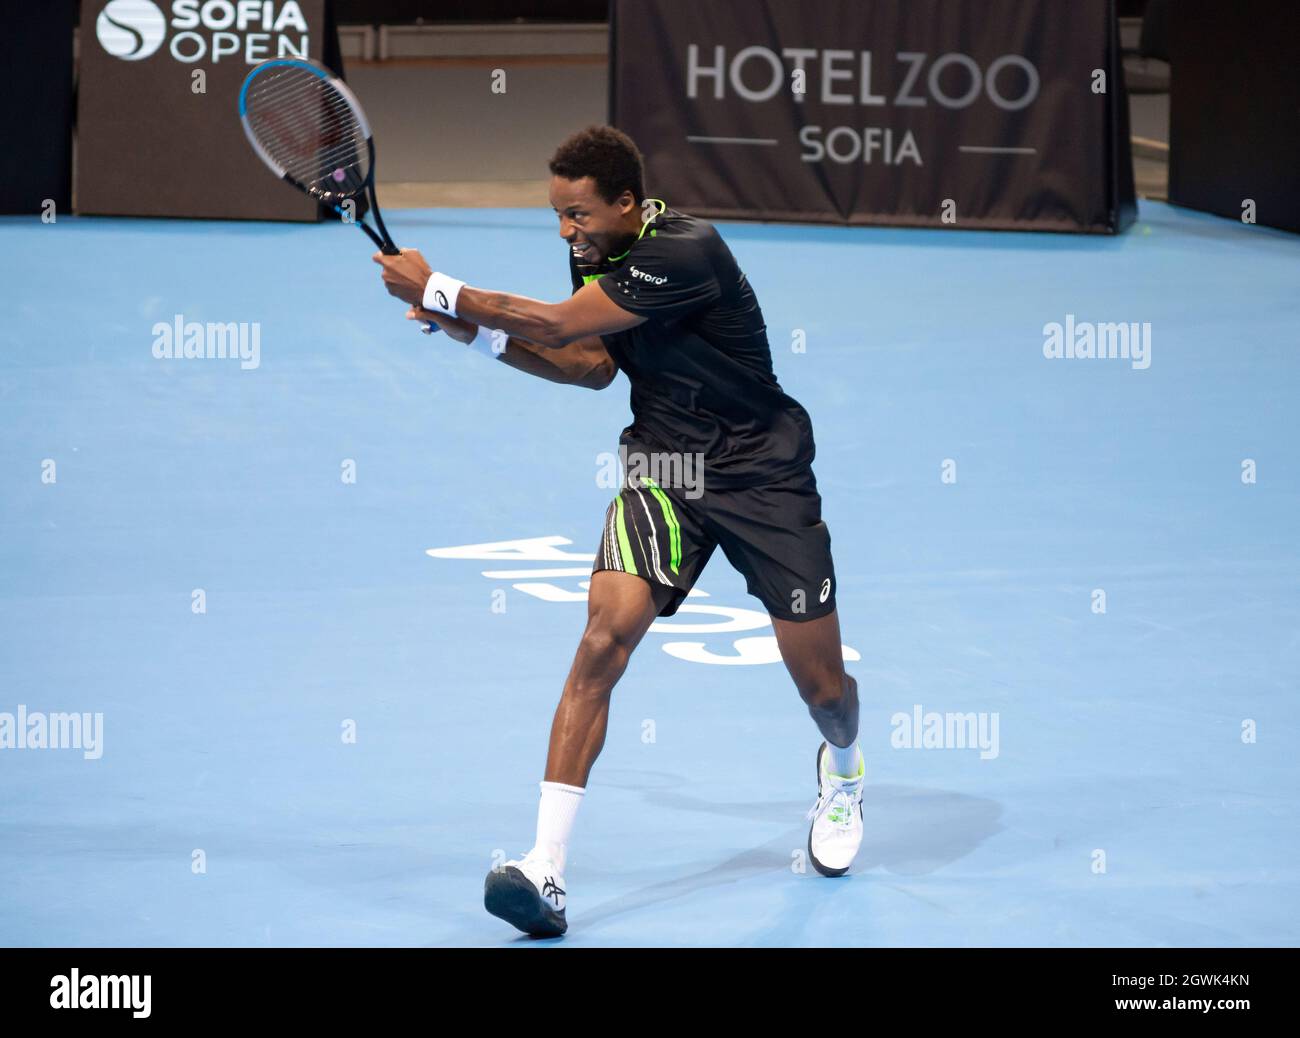 Sofia, Bulgaria. 03 October 2021. Gael Monfils of France in action against  Jannik Sinner of Italy during the men's singles final of the Sofia Open 2021 ATP 250 indoor tennis tournament on hard courts. Credit: Ognyan Yosifov/Alamy Live News Stock Photo